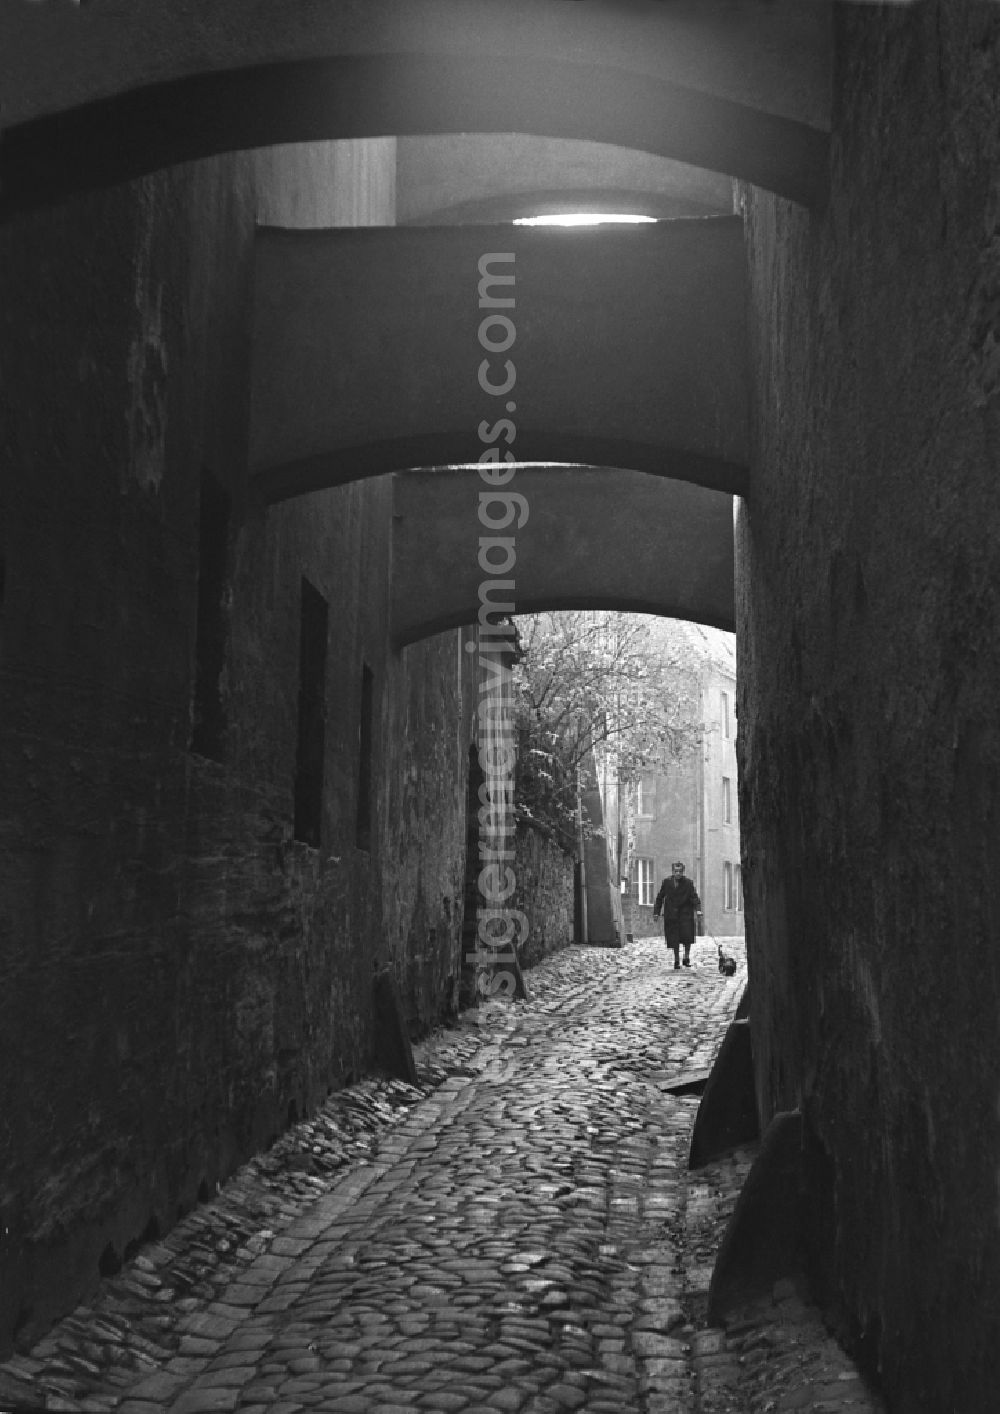 GDR photo archive: Bautzen - Pedestrians and passers-by in traffic in an alley in the old town in Bautzen, Saxony in the territory of the former GDR, German Democratic Republic